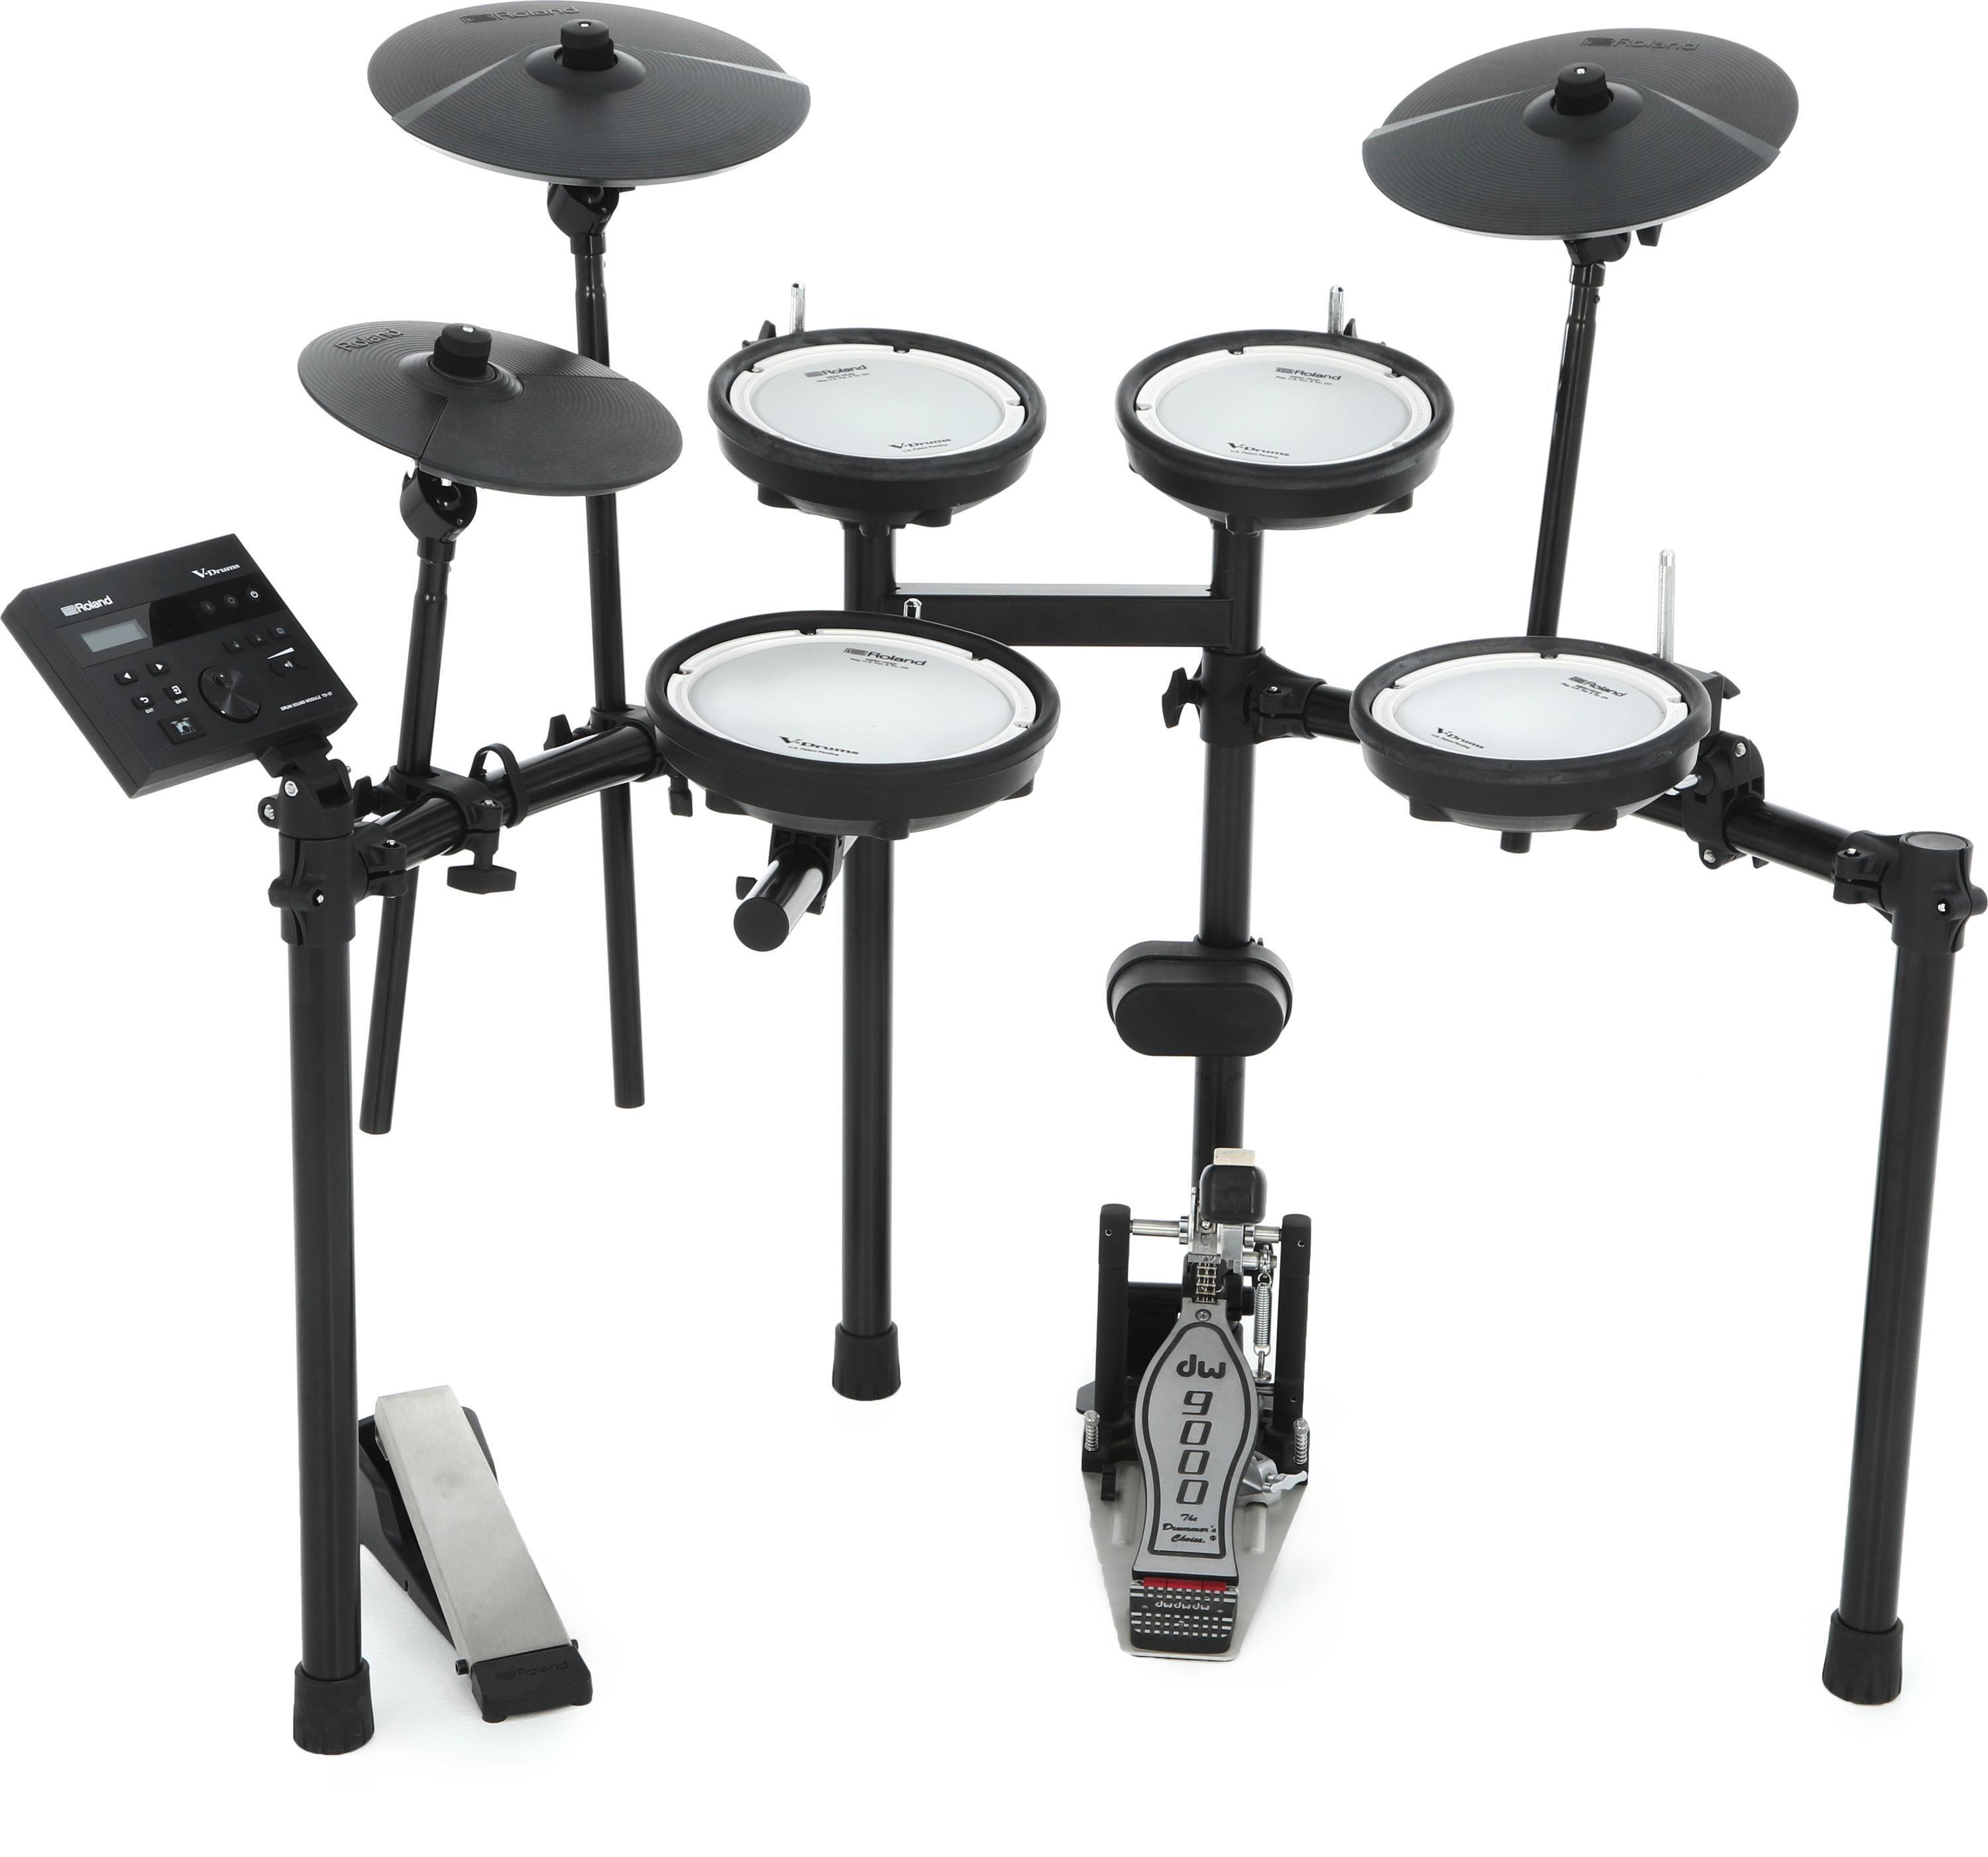 Roland V-Drums Portable TD-4KP Electronic Drum Set | Sweetwater